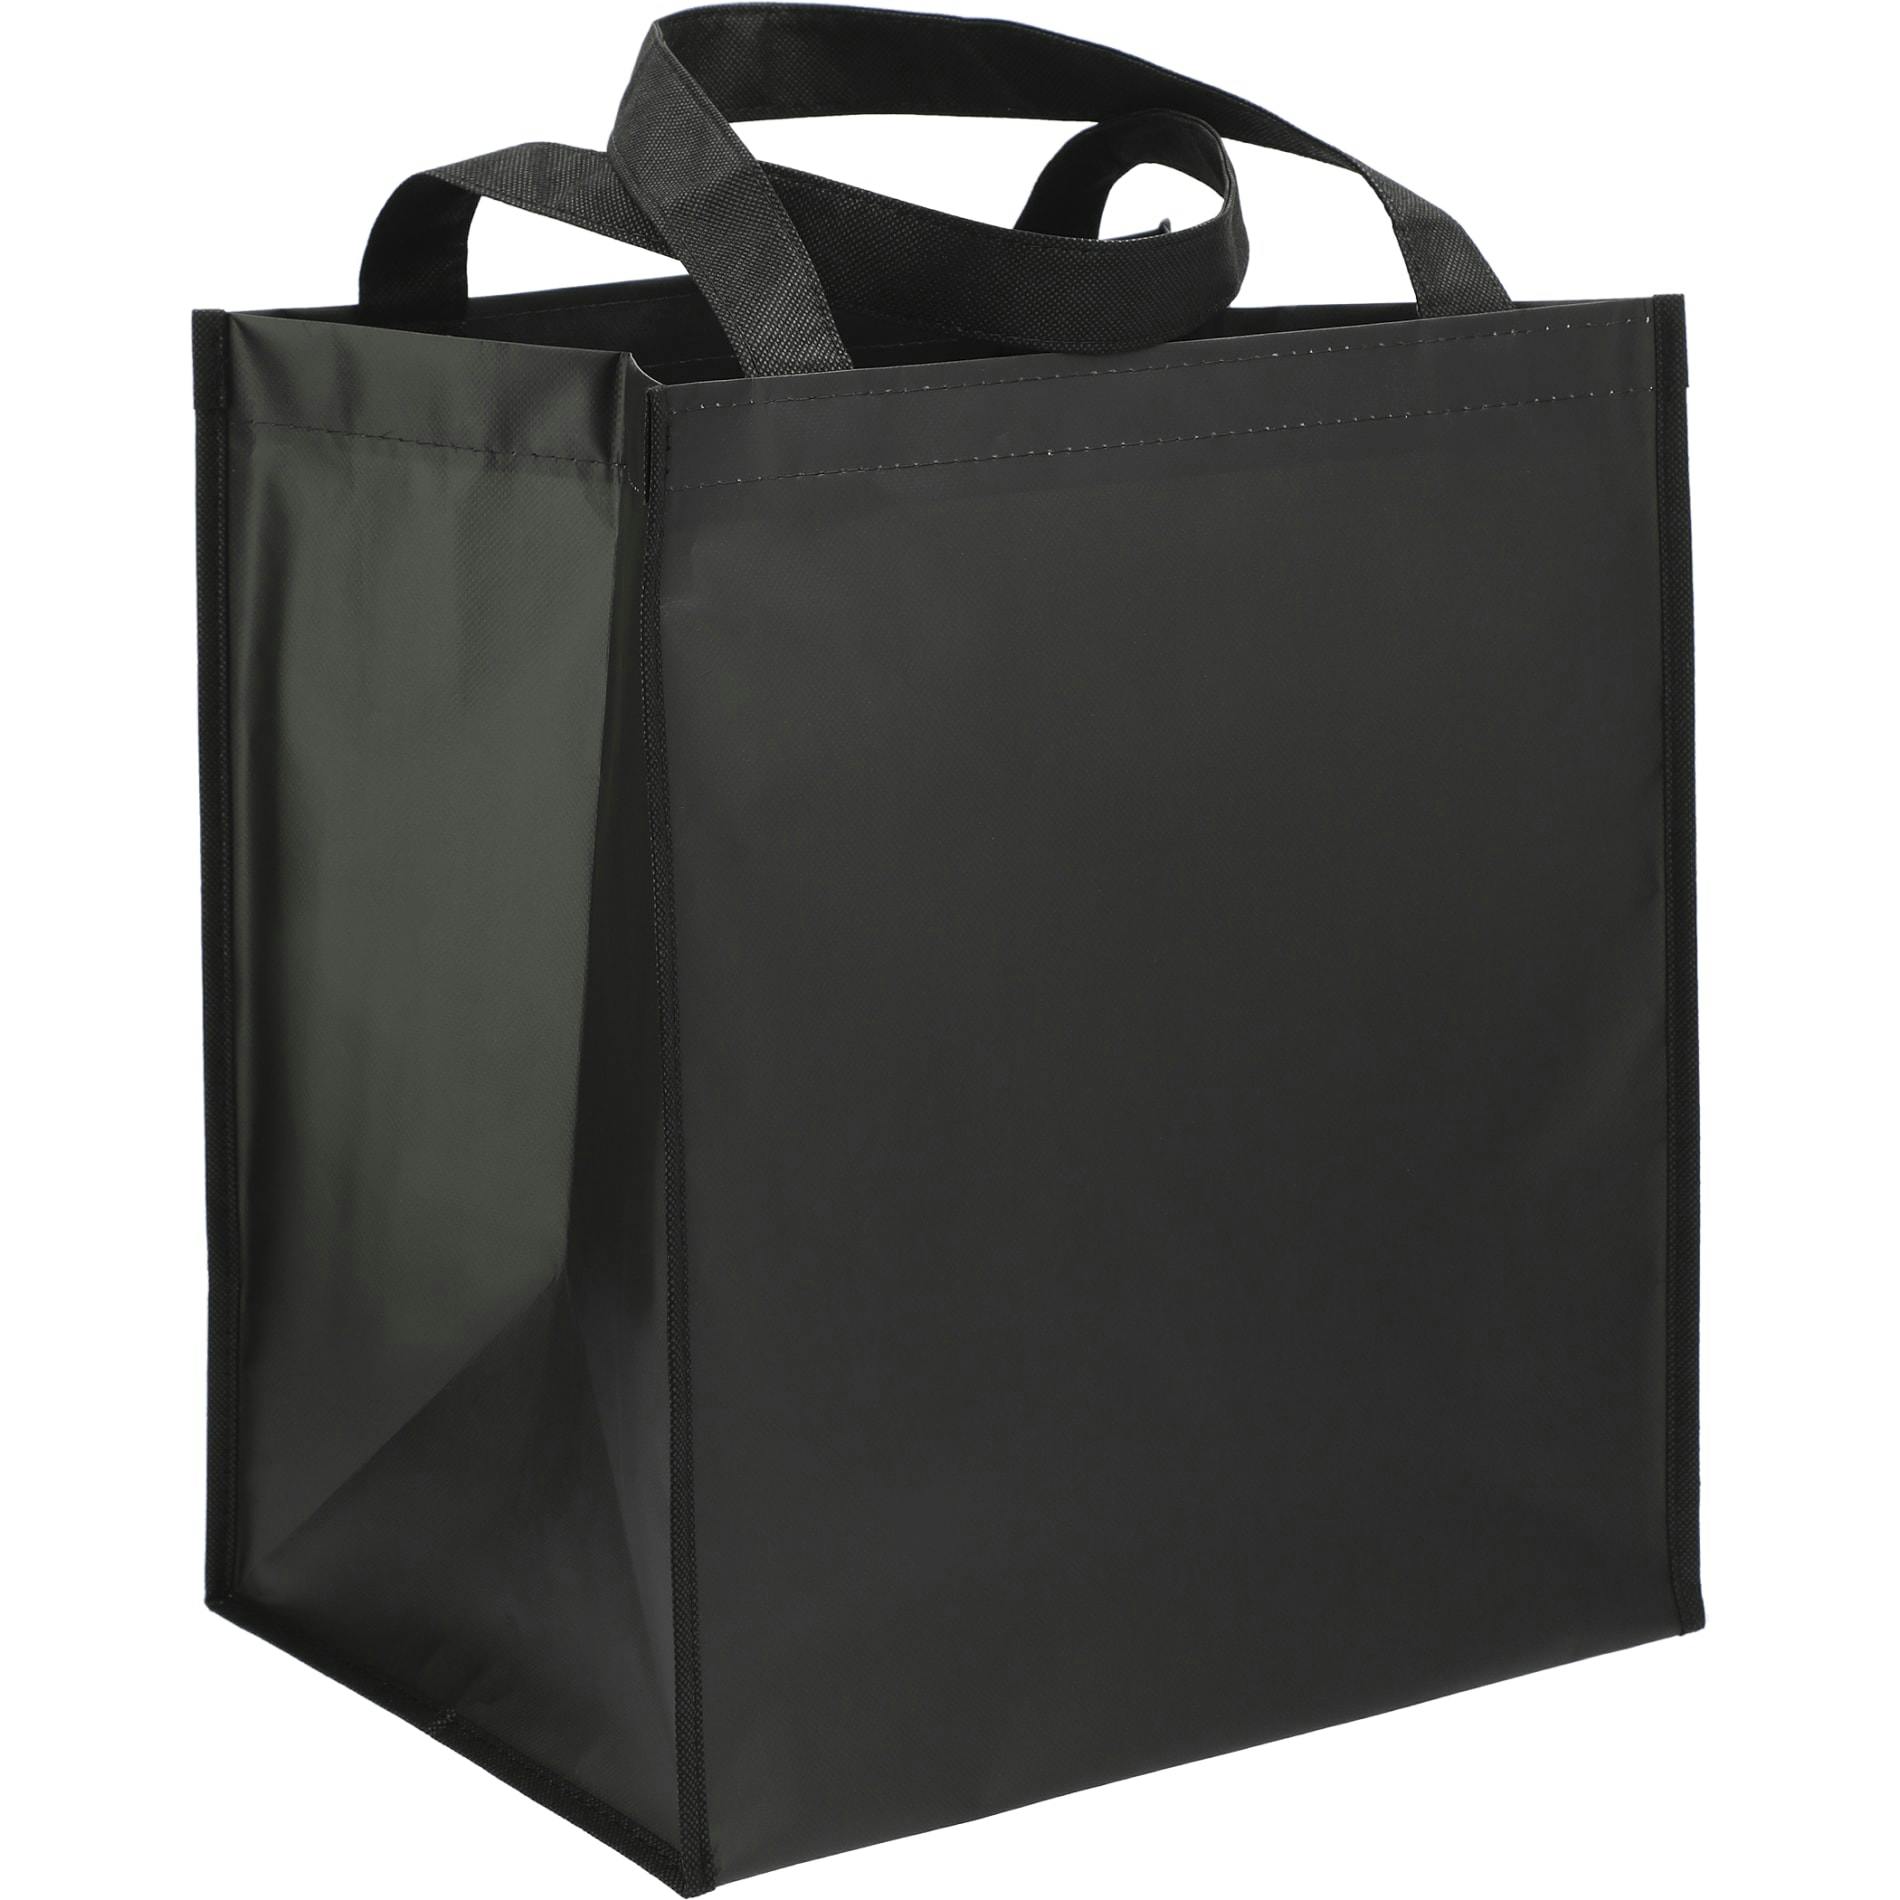 Double Laminated Wipeable Grocery Tote - additional Image 5